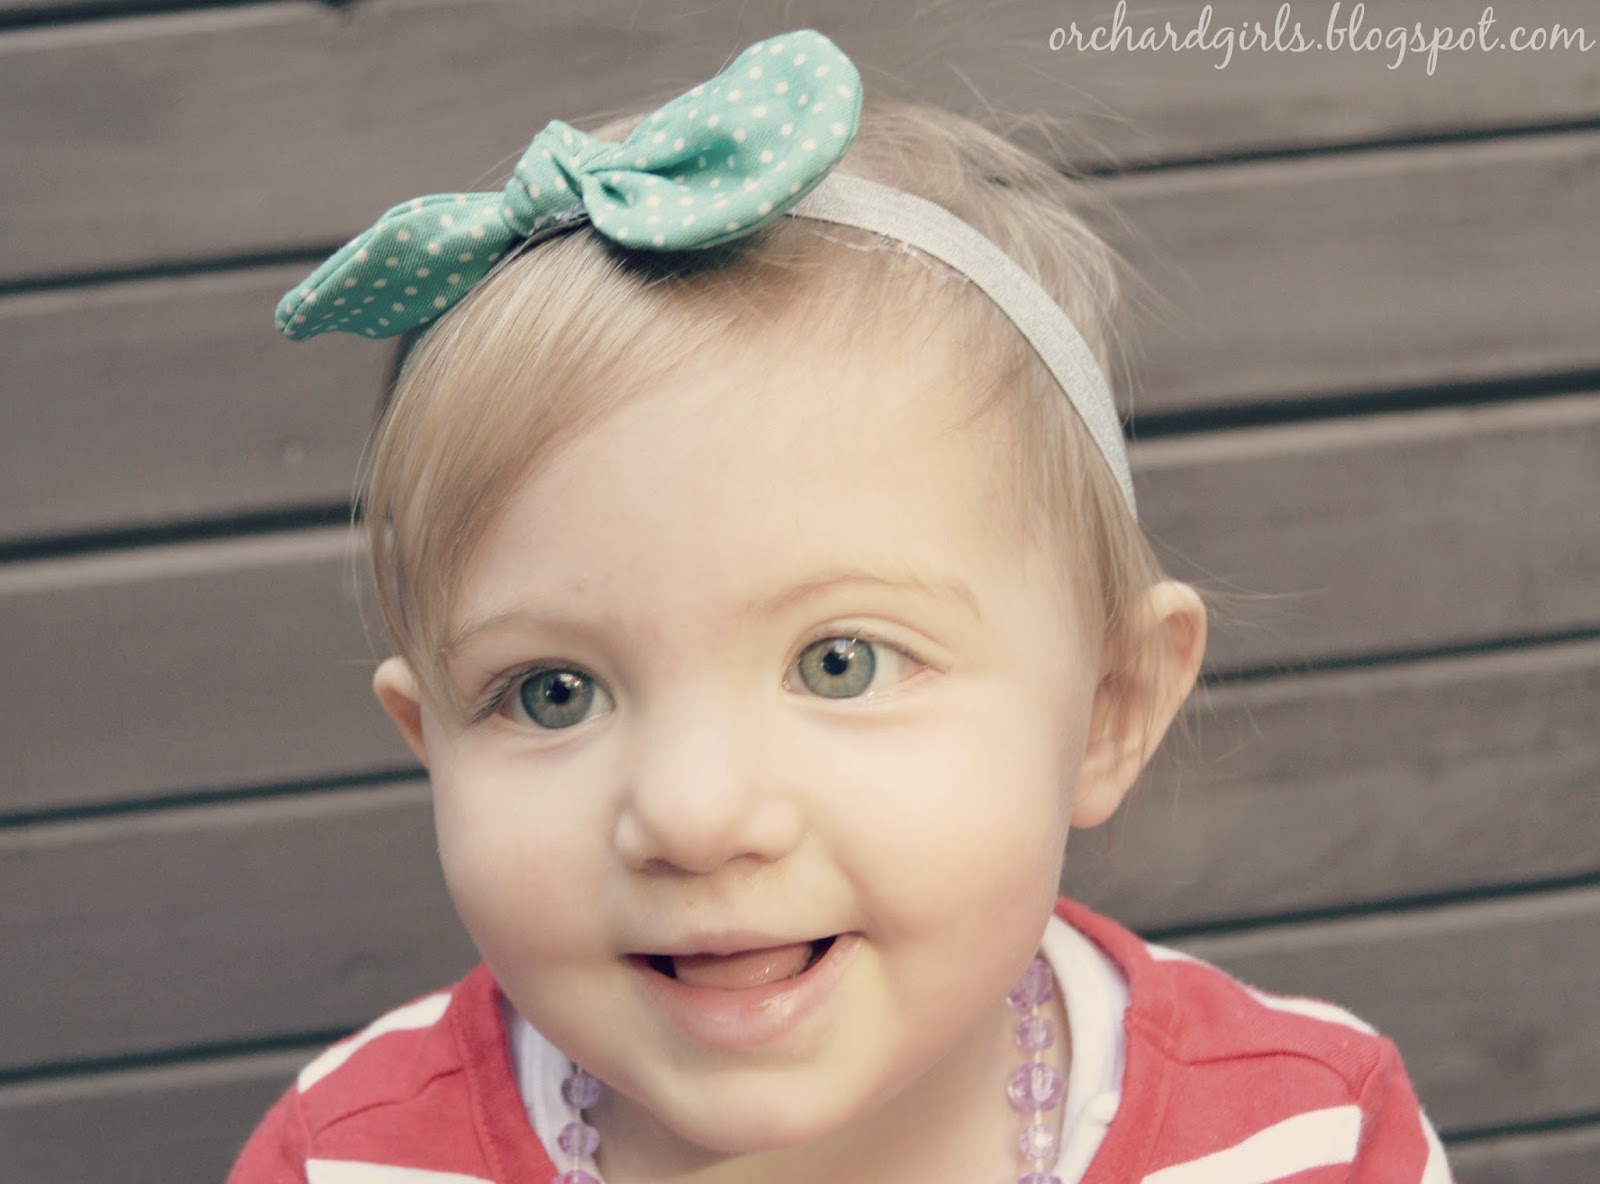 DIY Fabric Bows and headbands by OrchardGirls